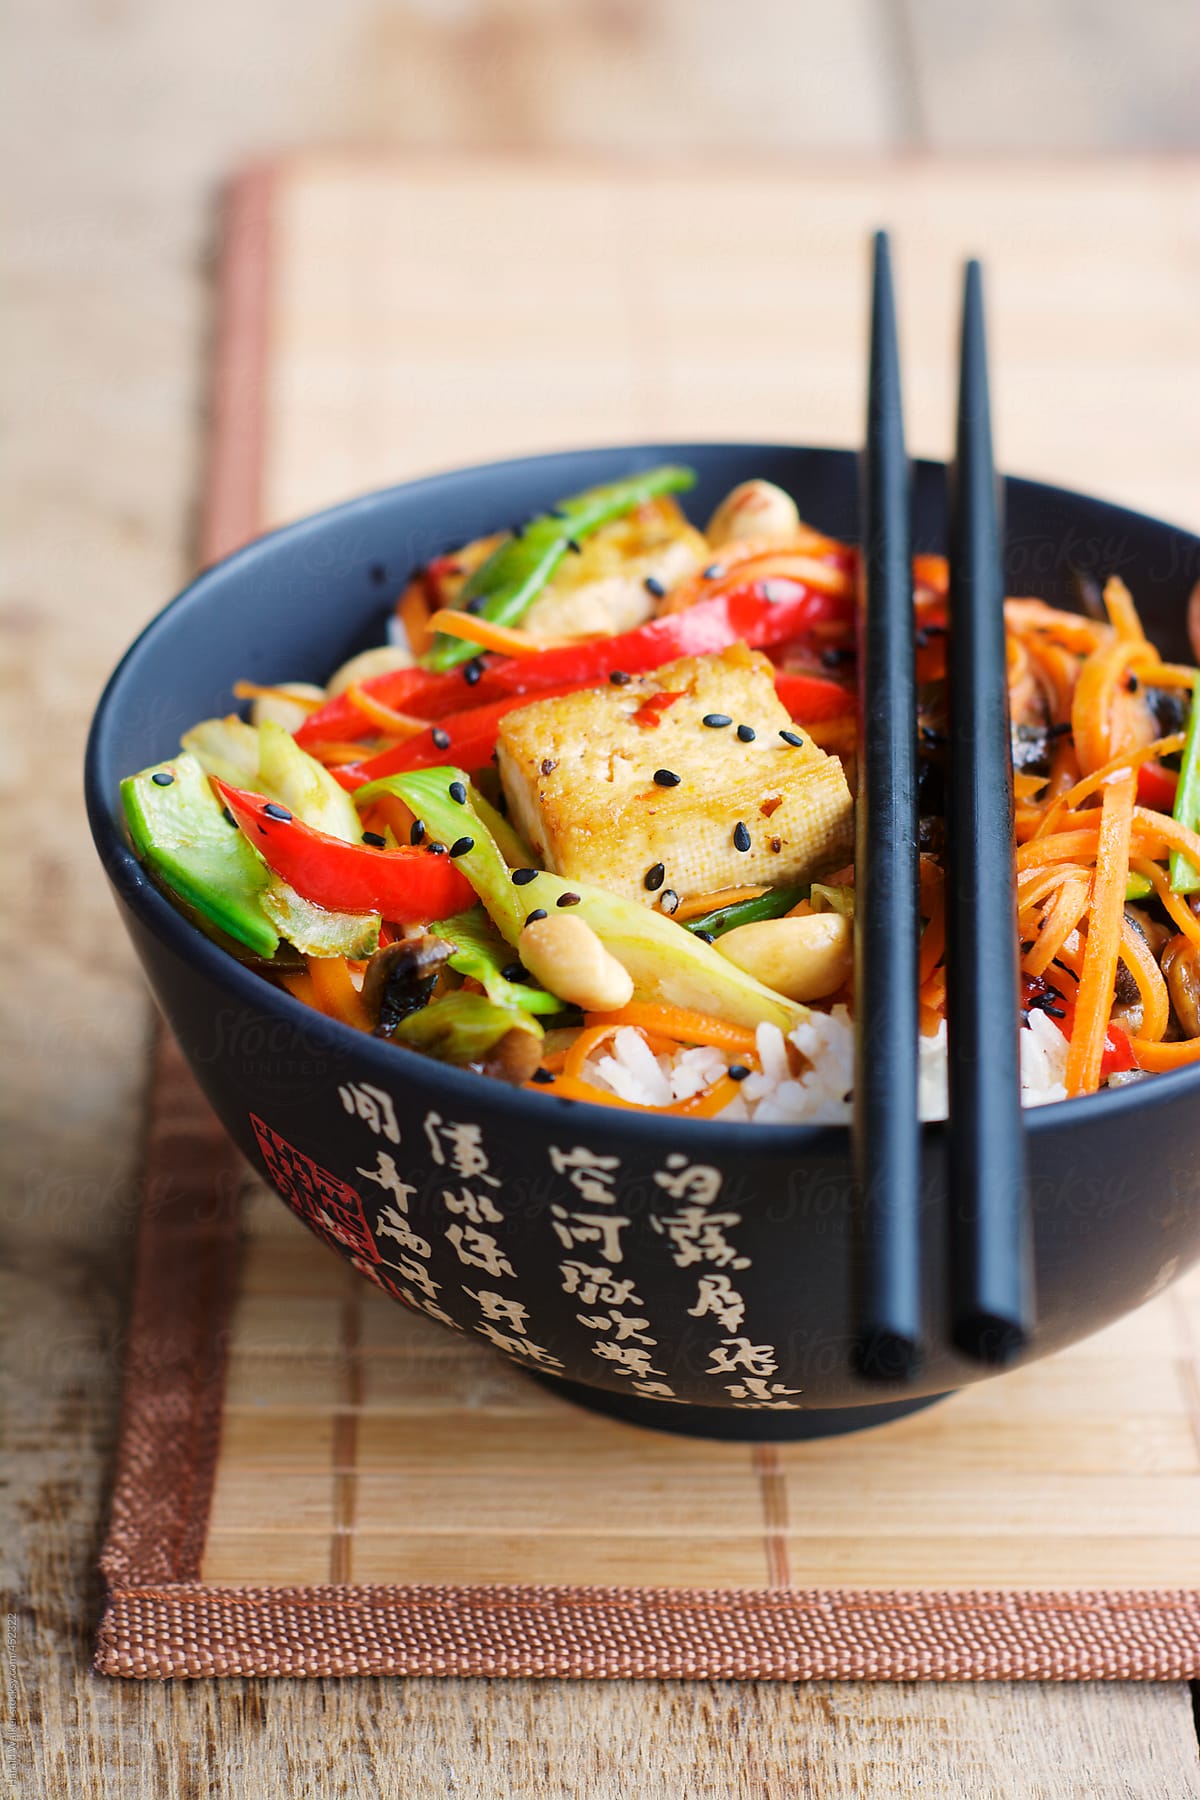 Szechuan Style Tofu with Vegetables and White Rice